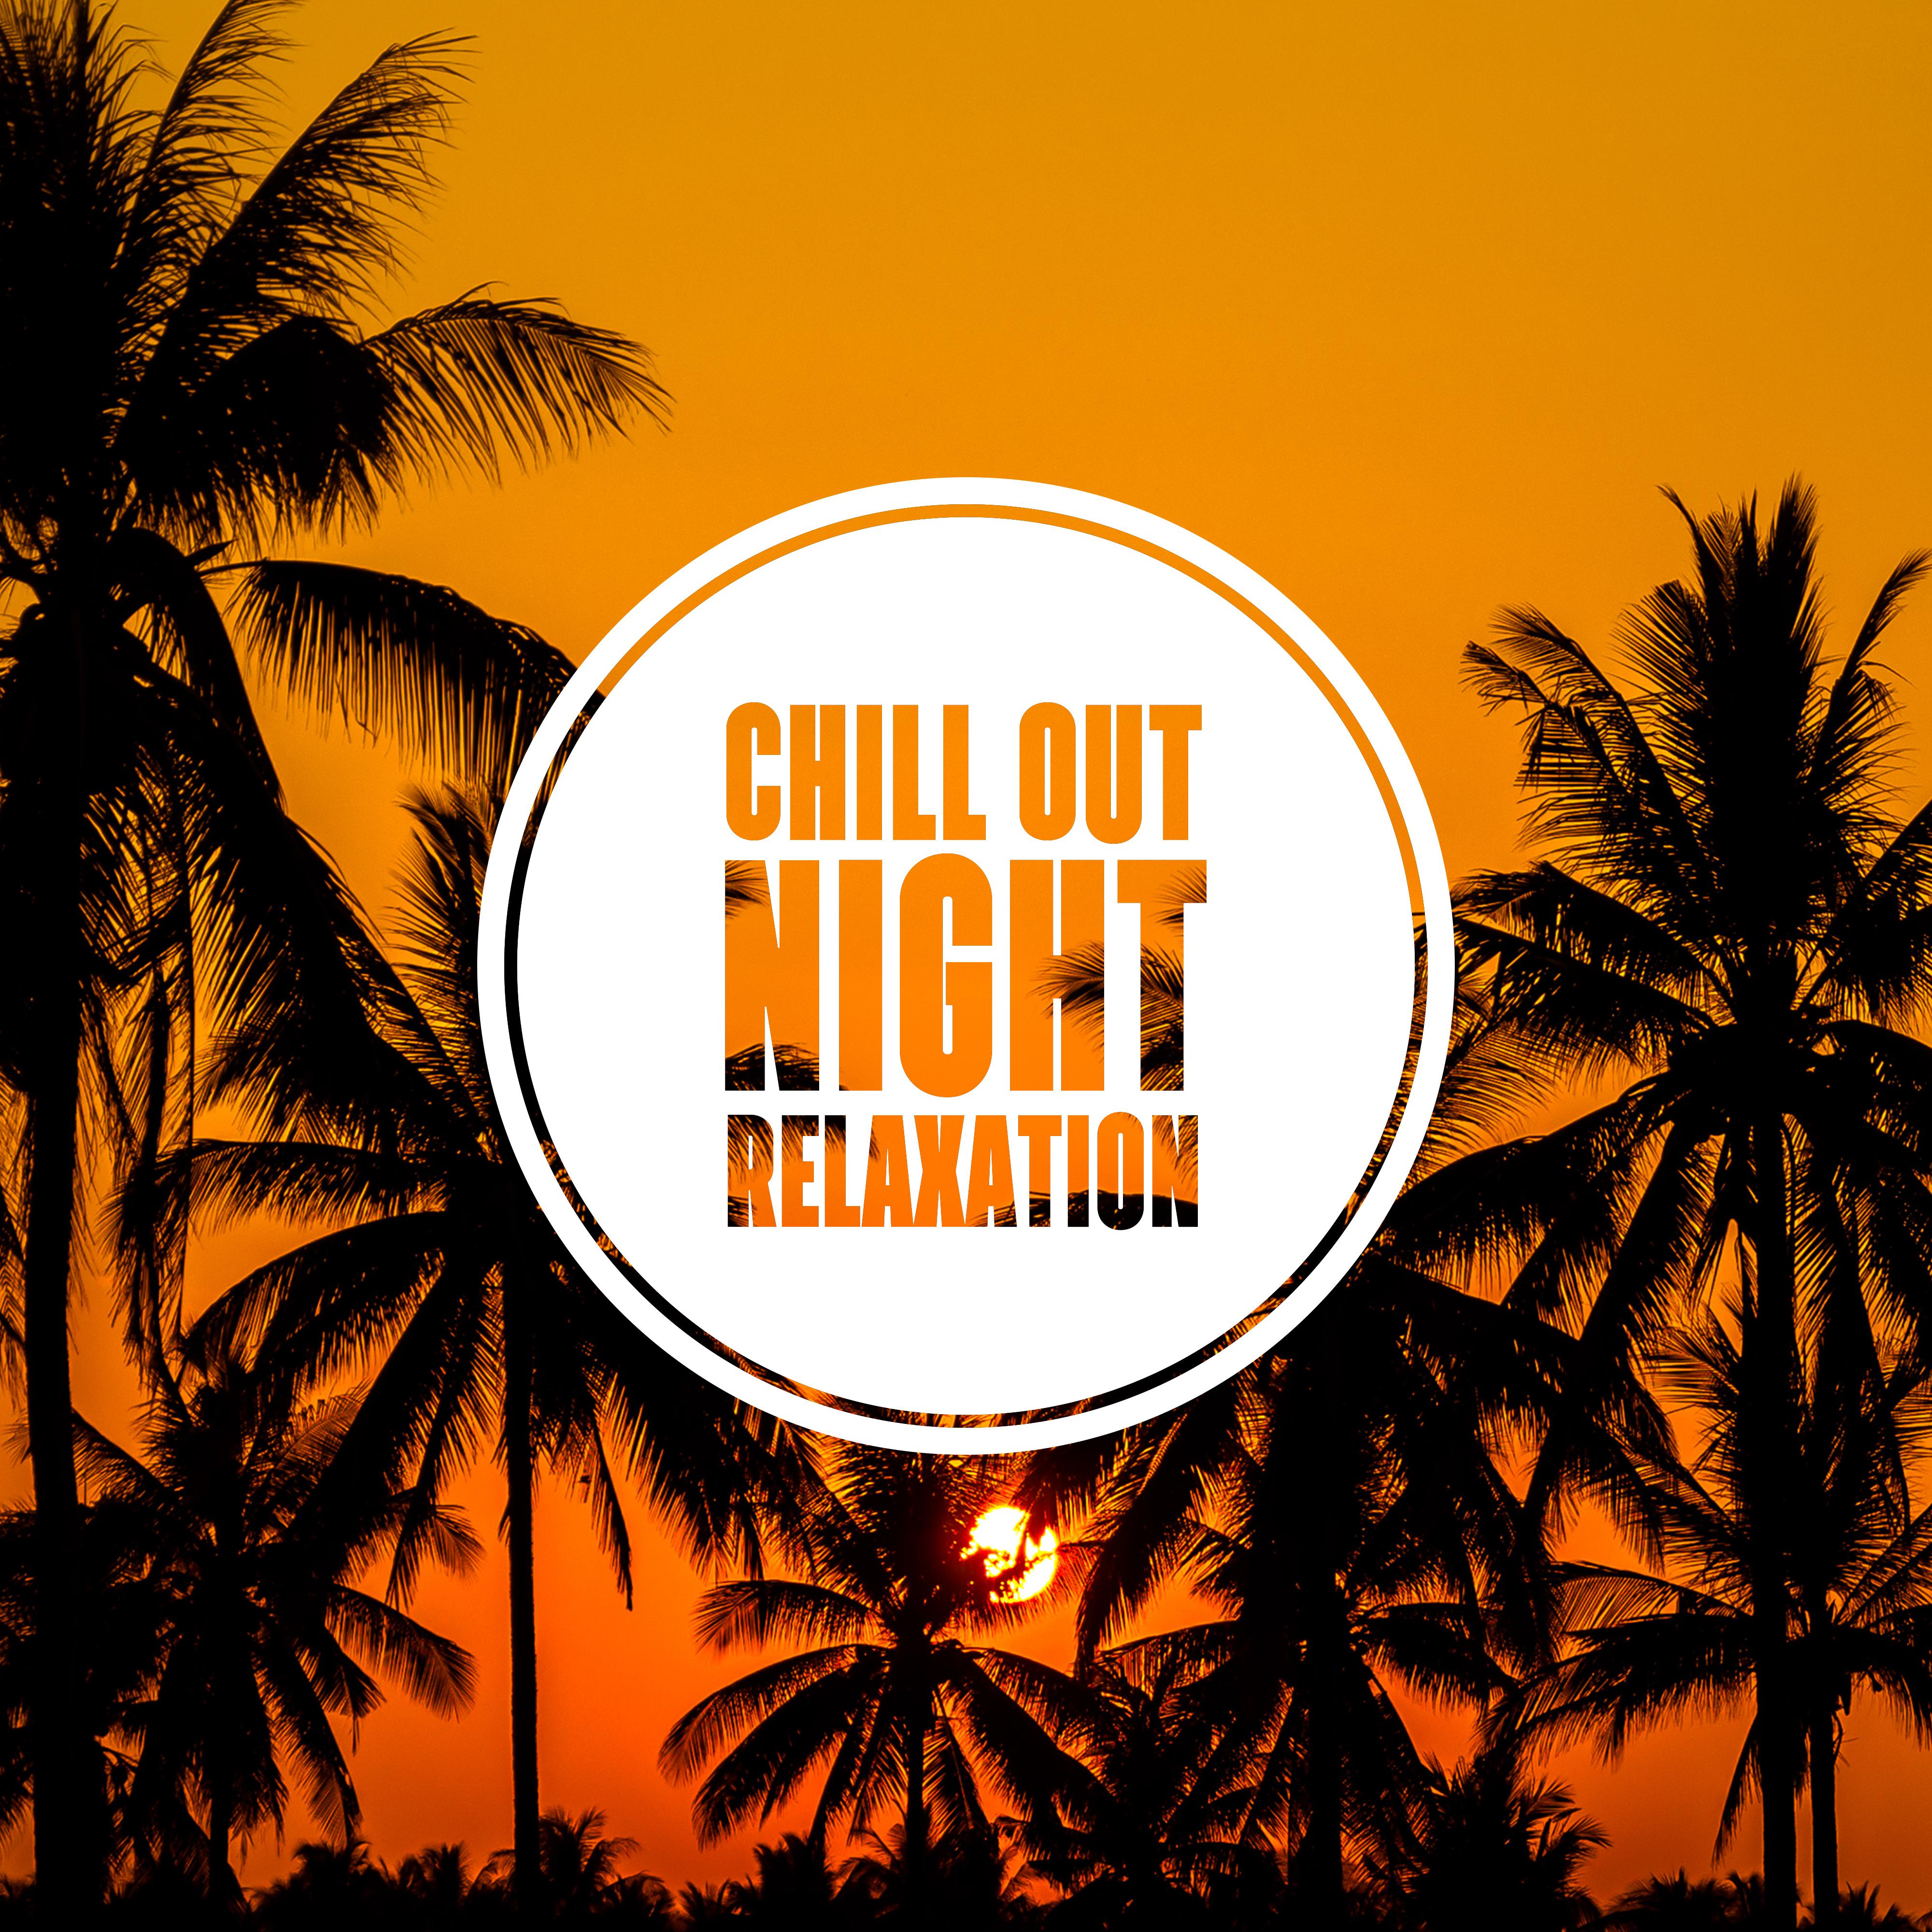 Chill Out Night Relaxation